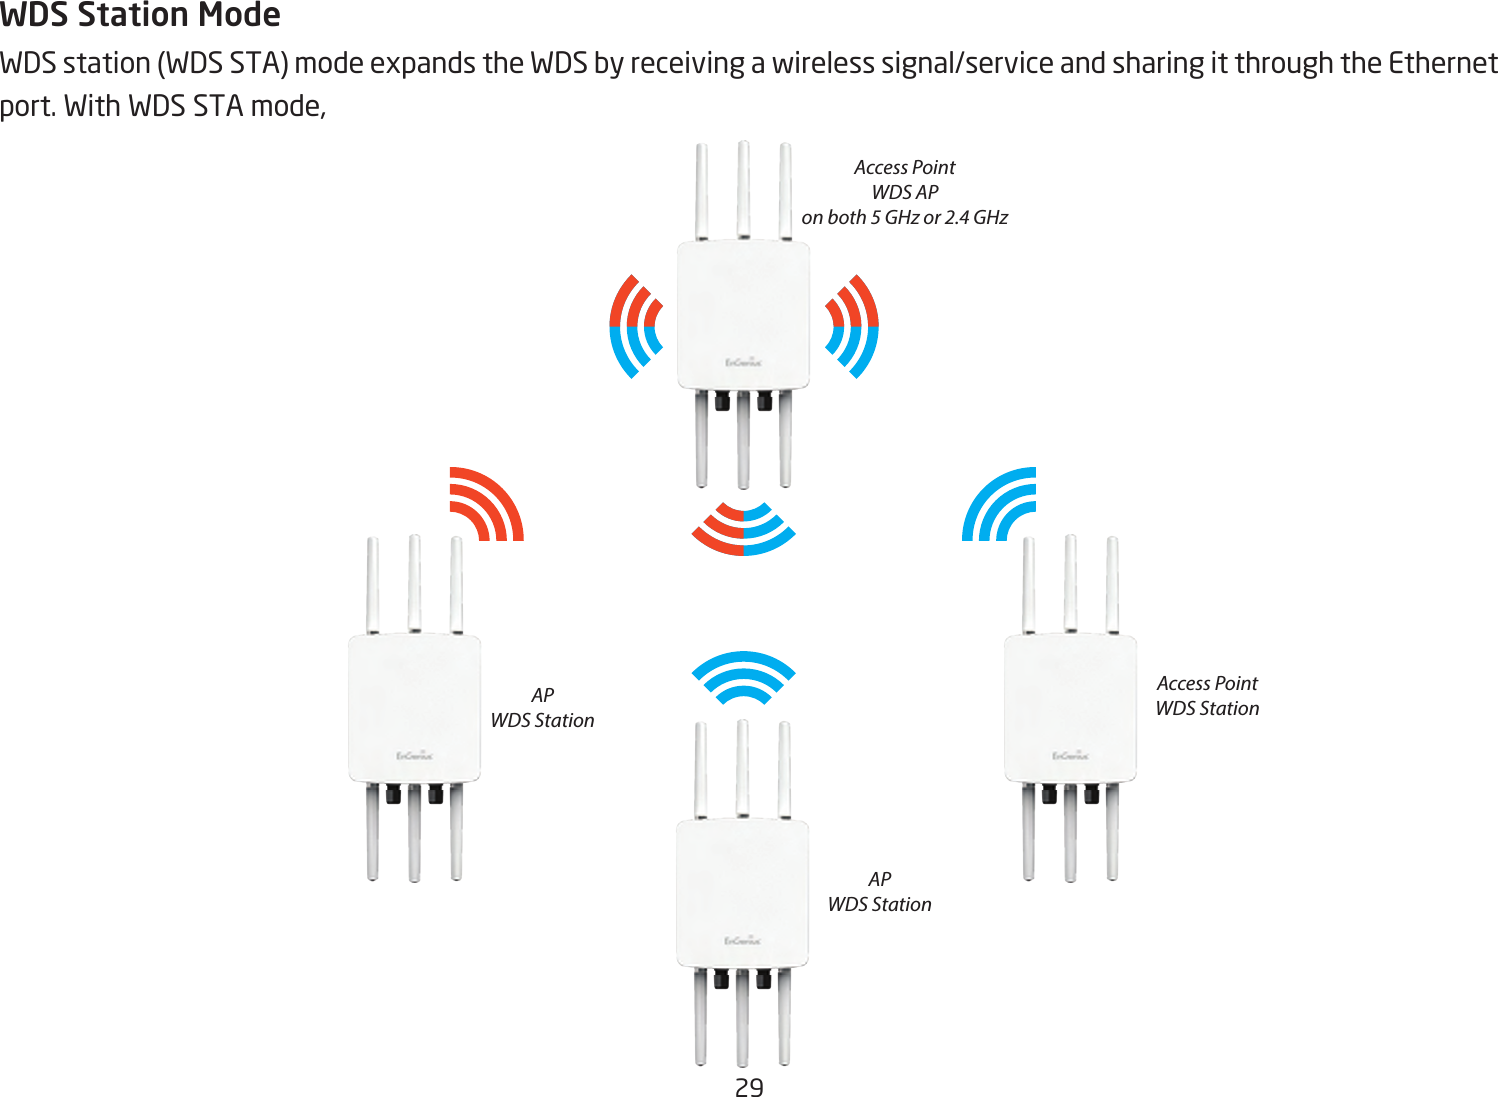 29WDS Station ModeWDS station (WDS STA) mode expands the WDS by receiving a wireless signal/service and sharing it through the Ethernet port. With WDS STA mode, Access PointWDS APon both 5 GHz or 2.4 GHzAccess PointWDS StationAPWDS StationAPWDS Station